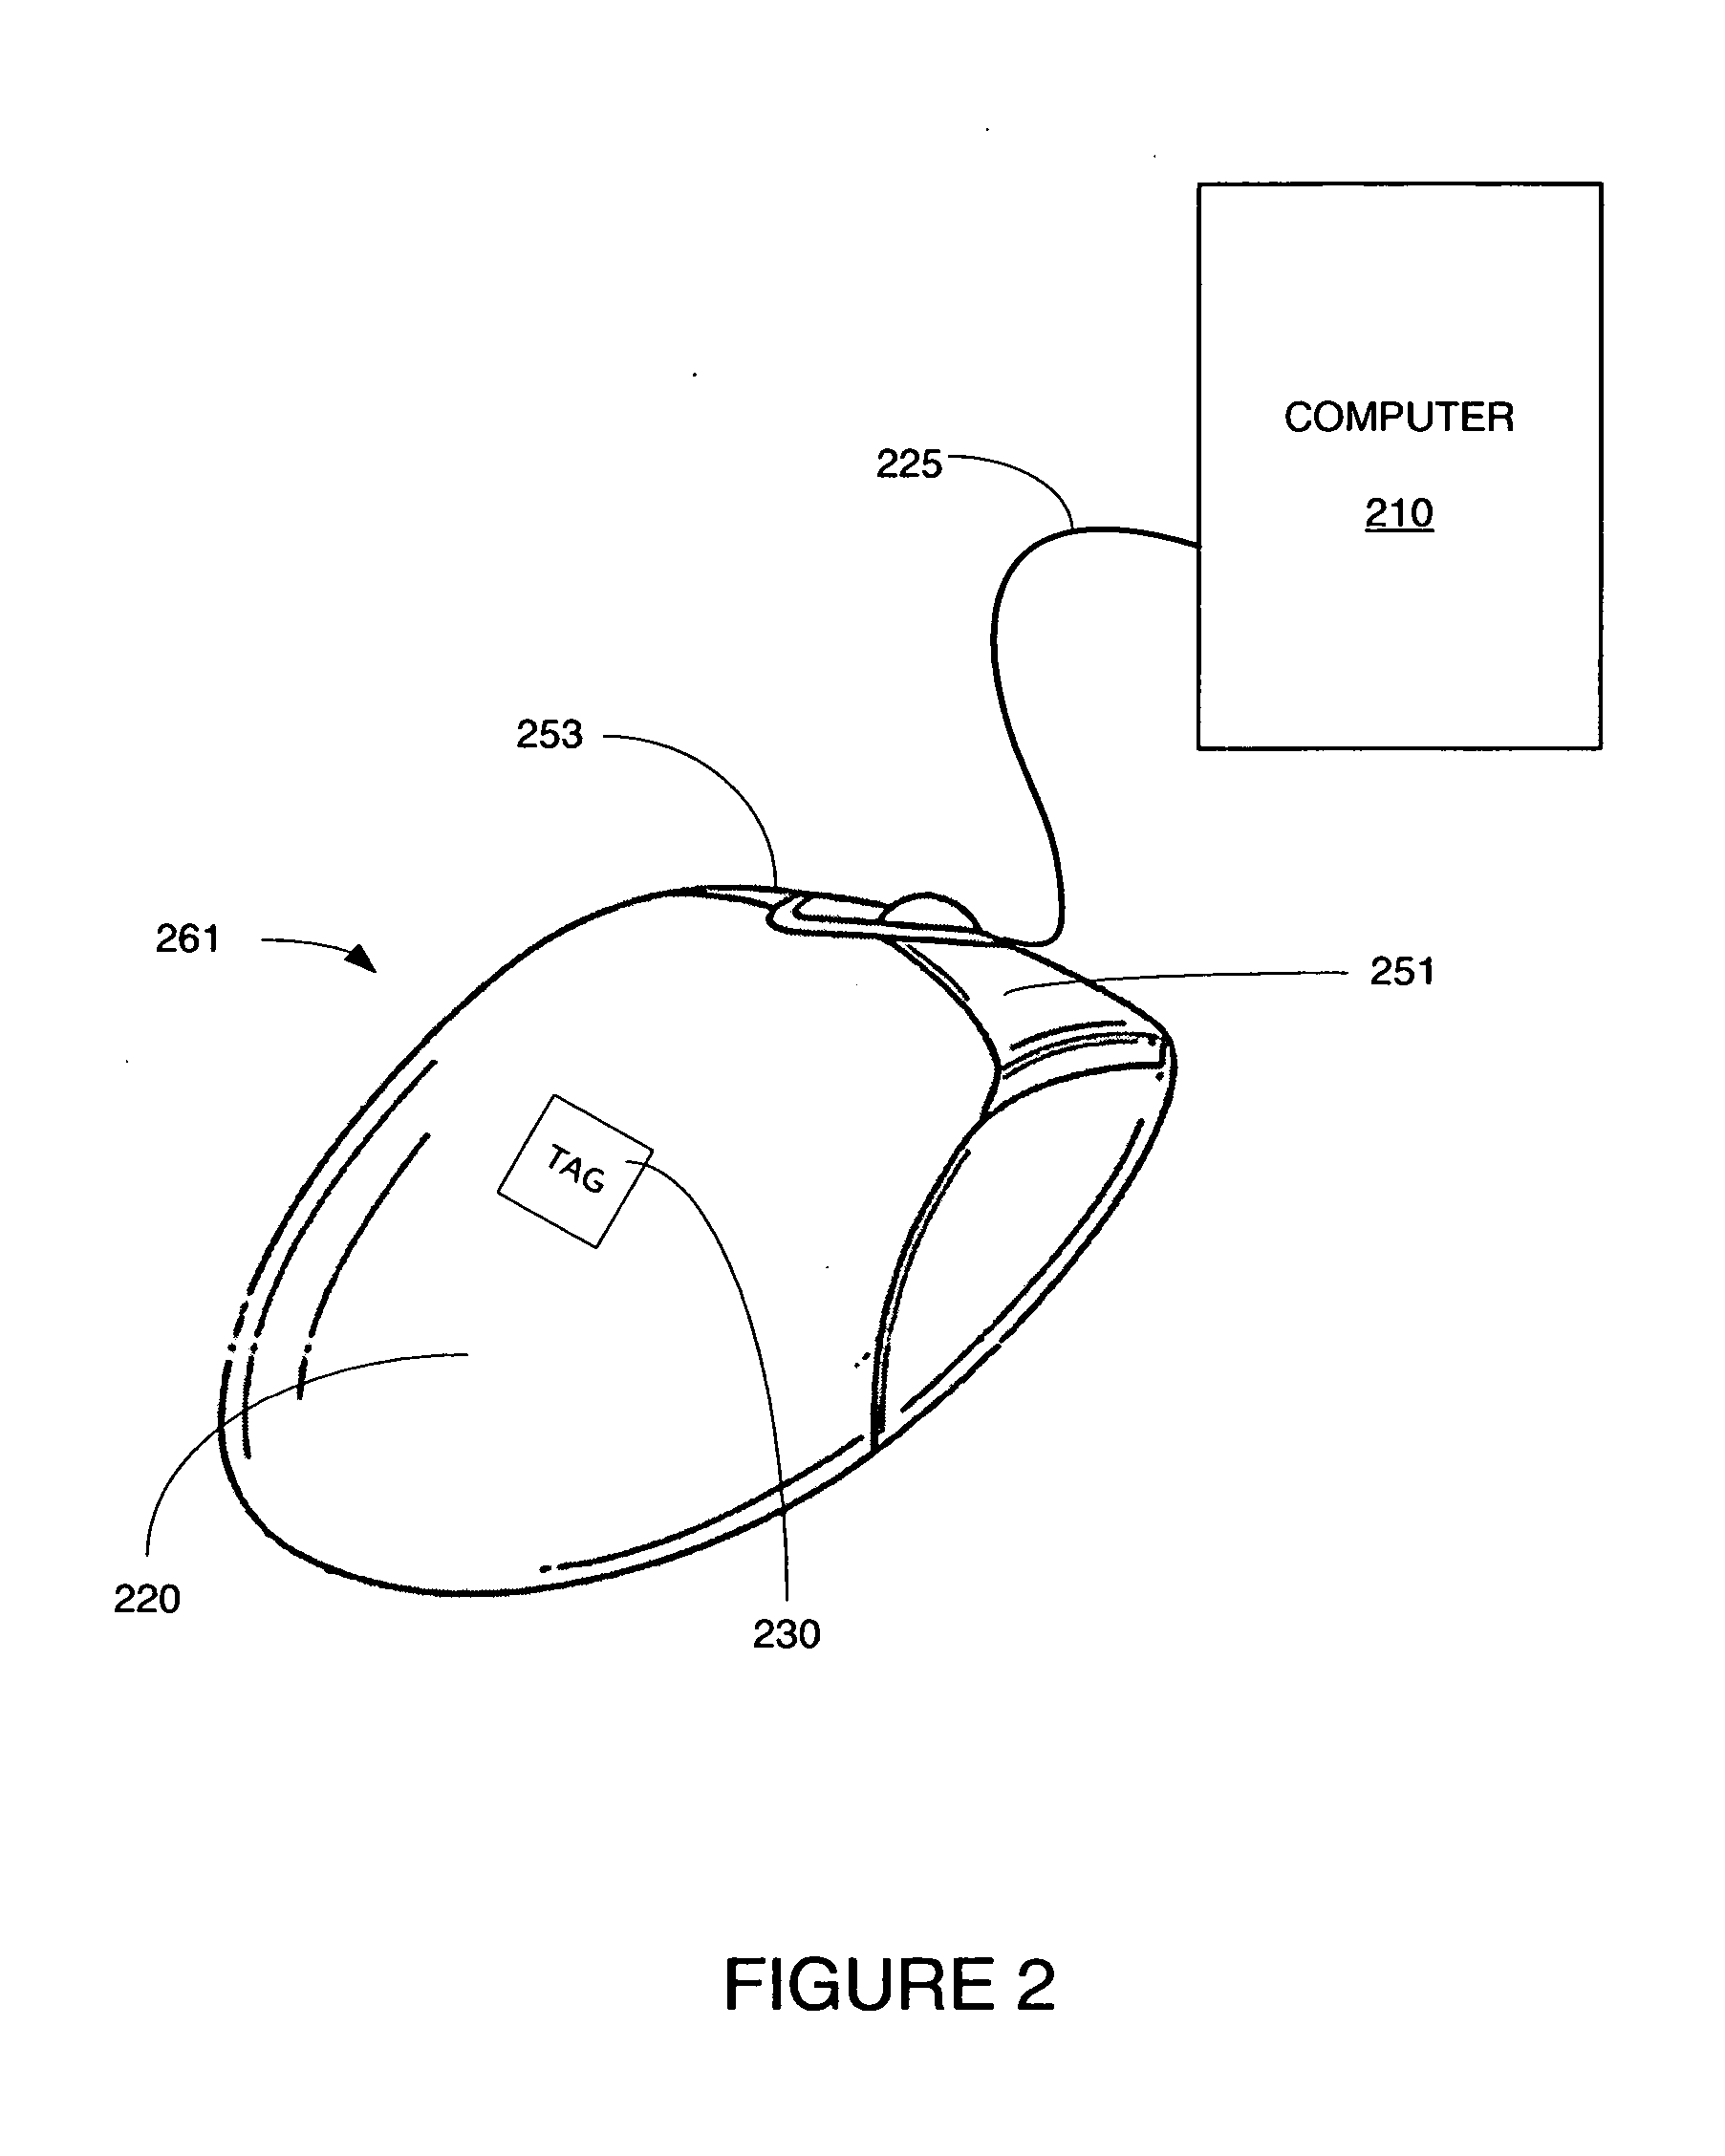 Modular, attachable objects with tags as intuitive physical interface facilitating user interaction with a computer